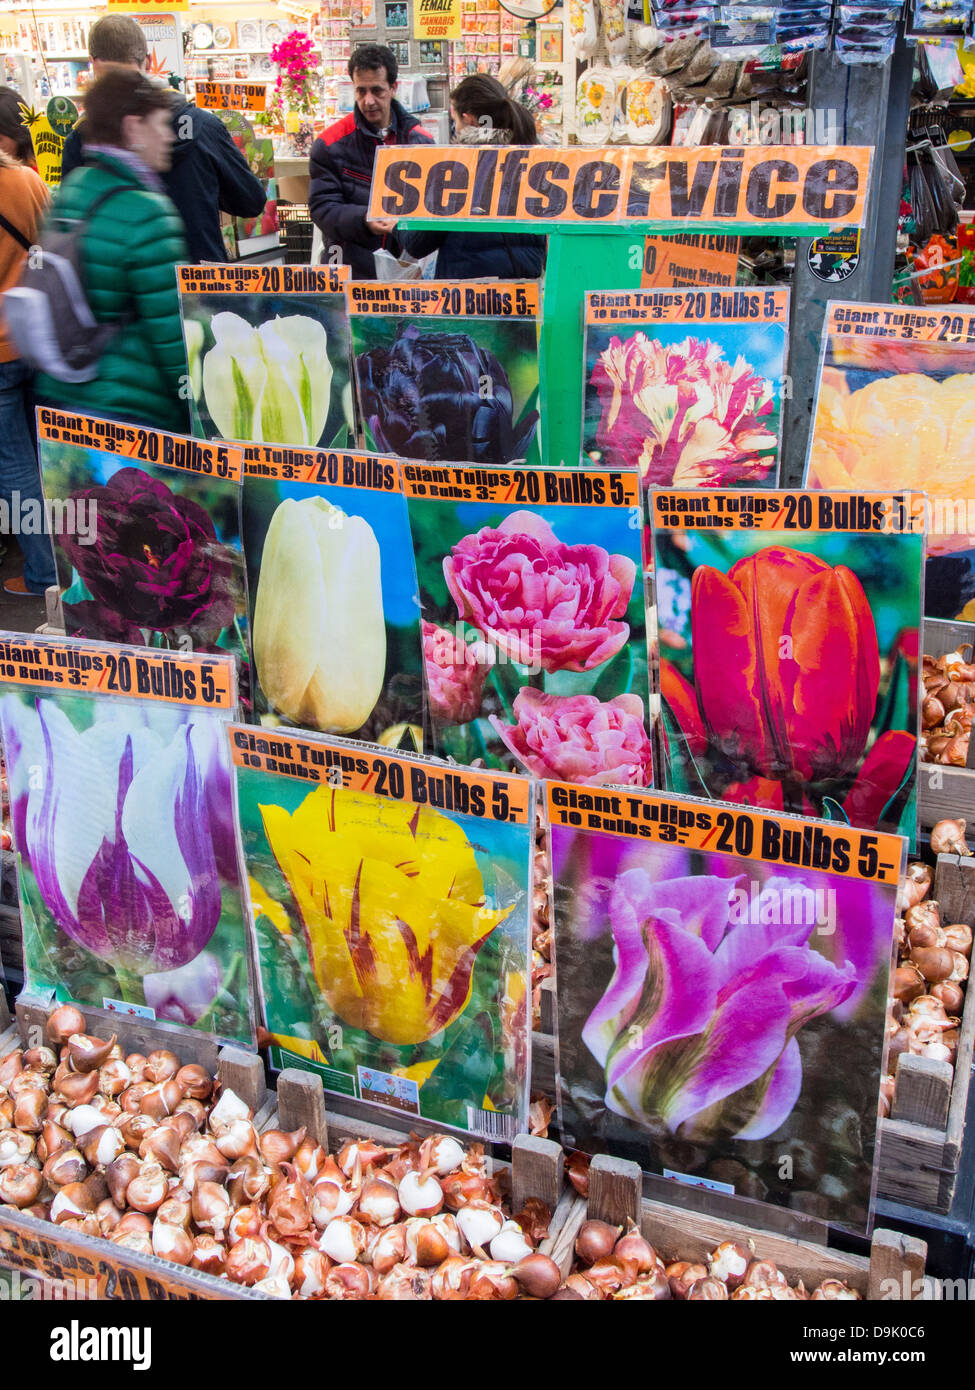 Tulip bulbs for sale at a market in Amsterdam, Netherlands. Stock Photo